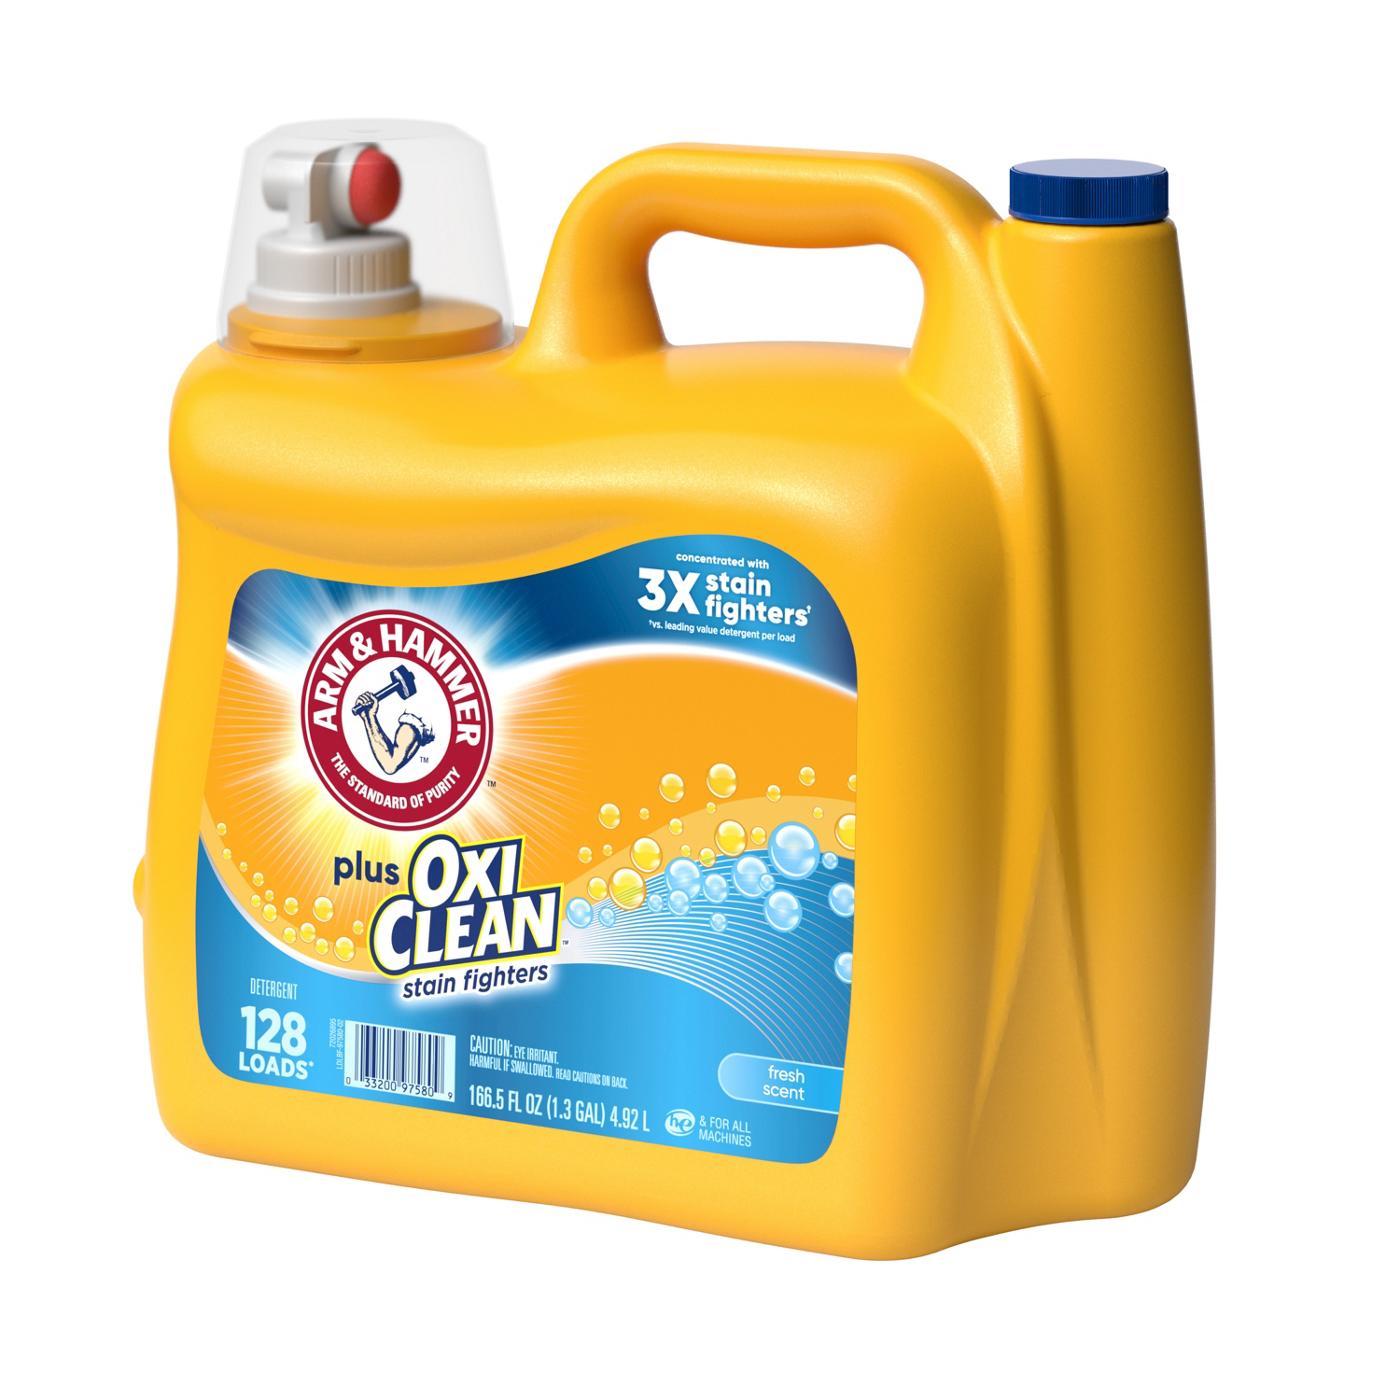 Arm & Hammer Plus OxiClean HE Liquid Laundry Detergent, 128 Loads - Fresh Scent; image 4 of 4